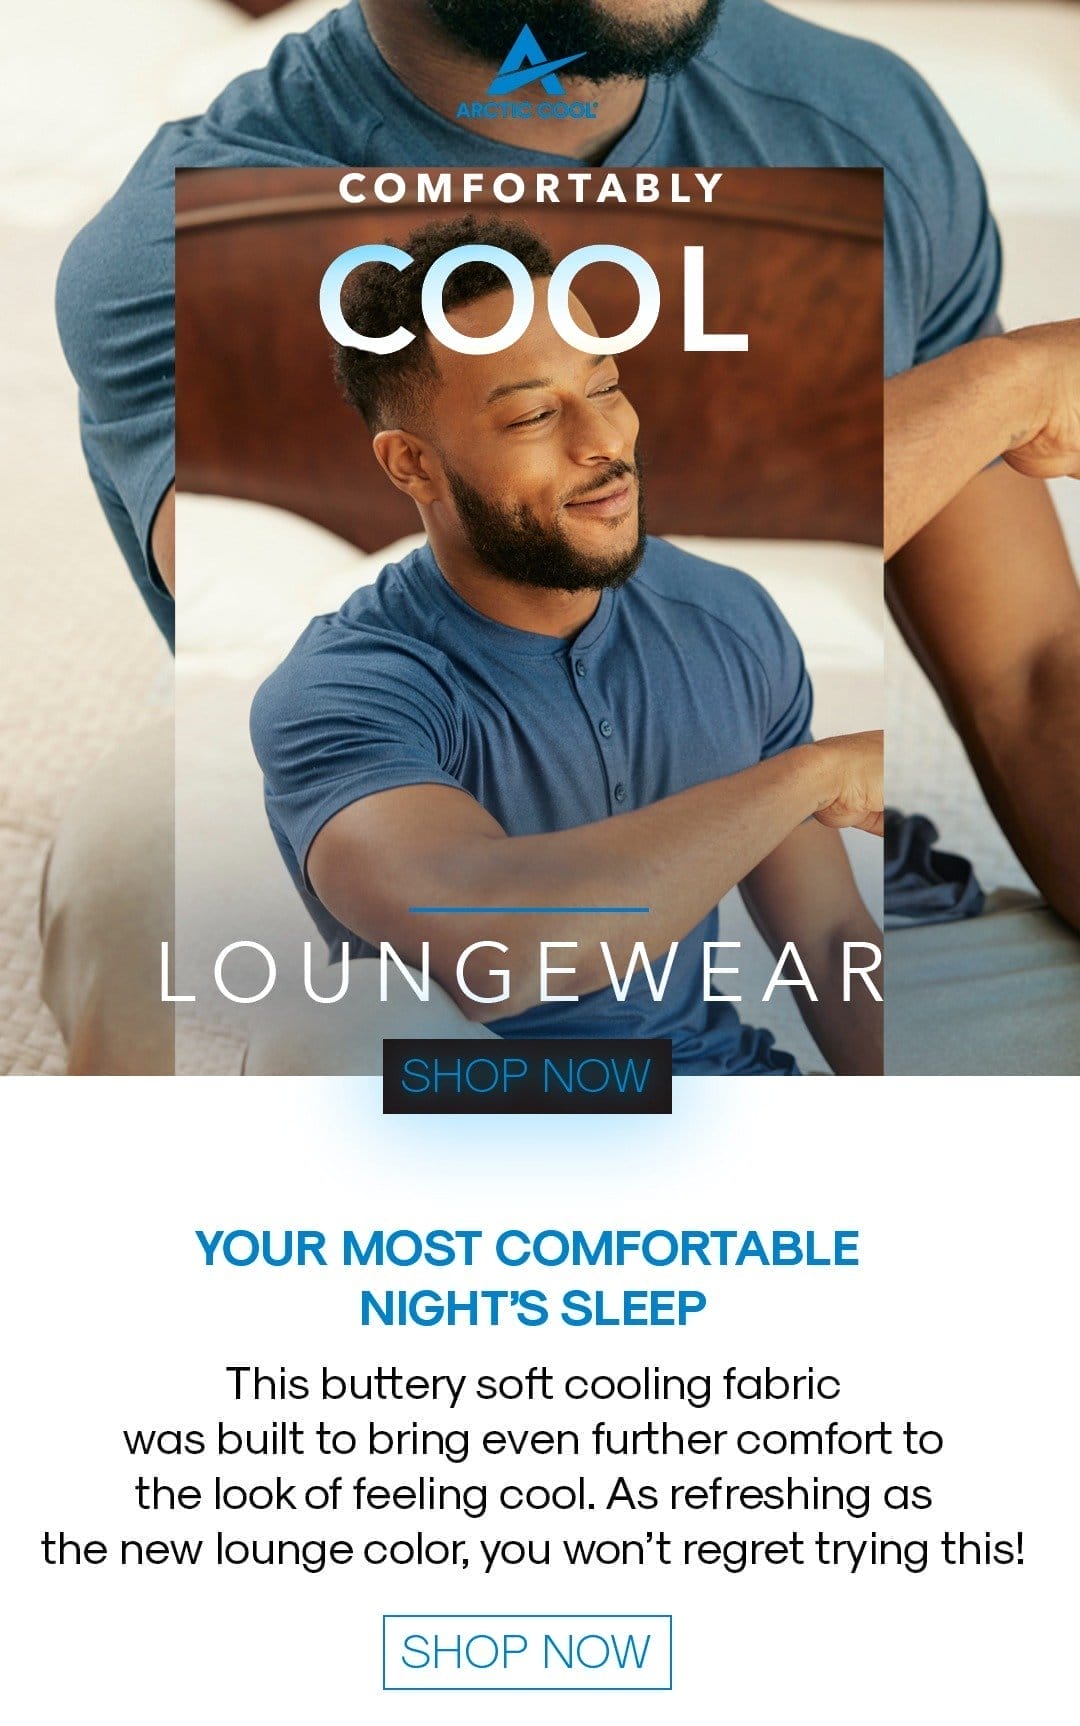 Comfortably cool loungewear shop now Your most comfortable night's sleep This buttery soft cooling fabric was built to bring even further comfort to the look of feeling cool. As refreshing as the new lounge color, you won't regret trying this! Shop now